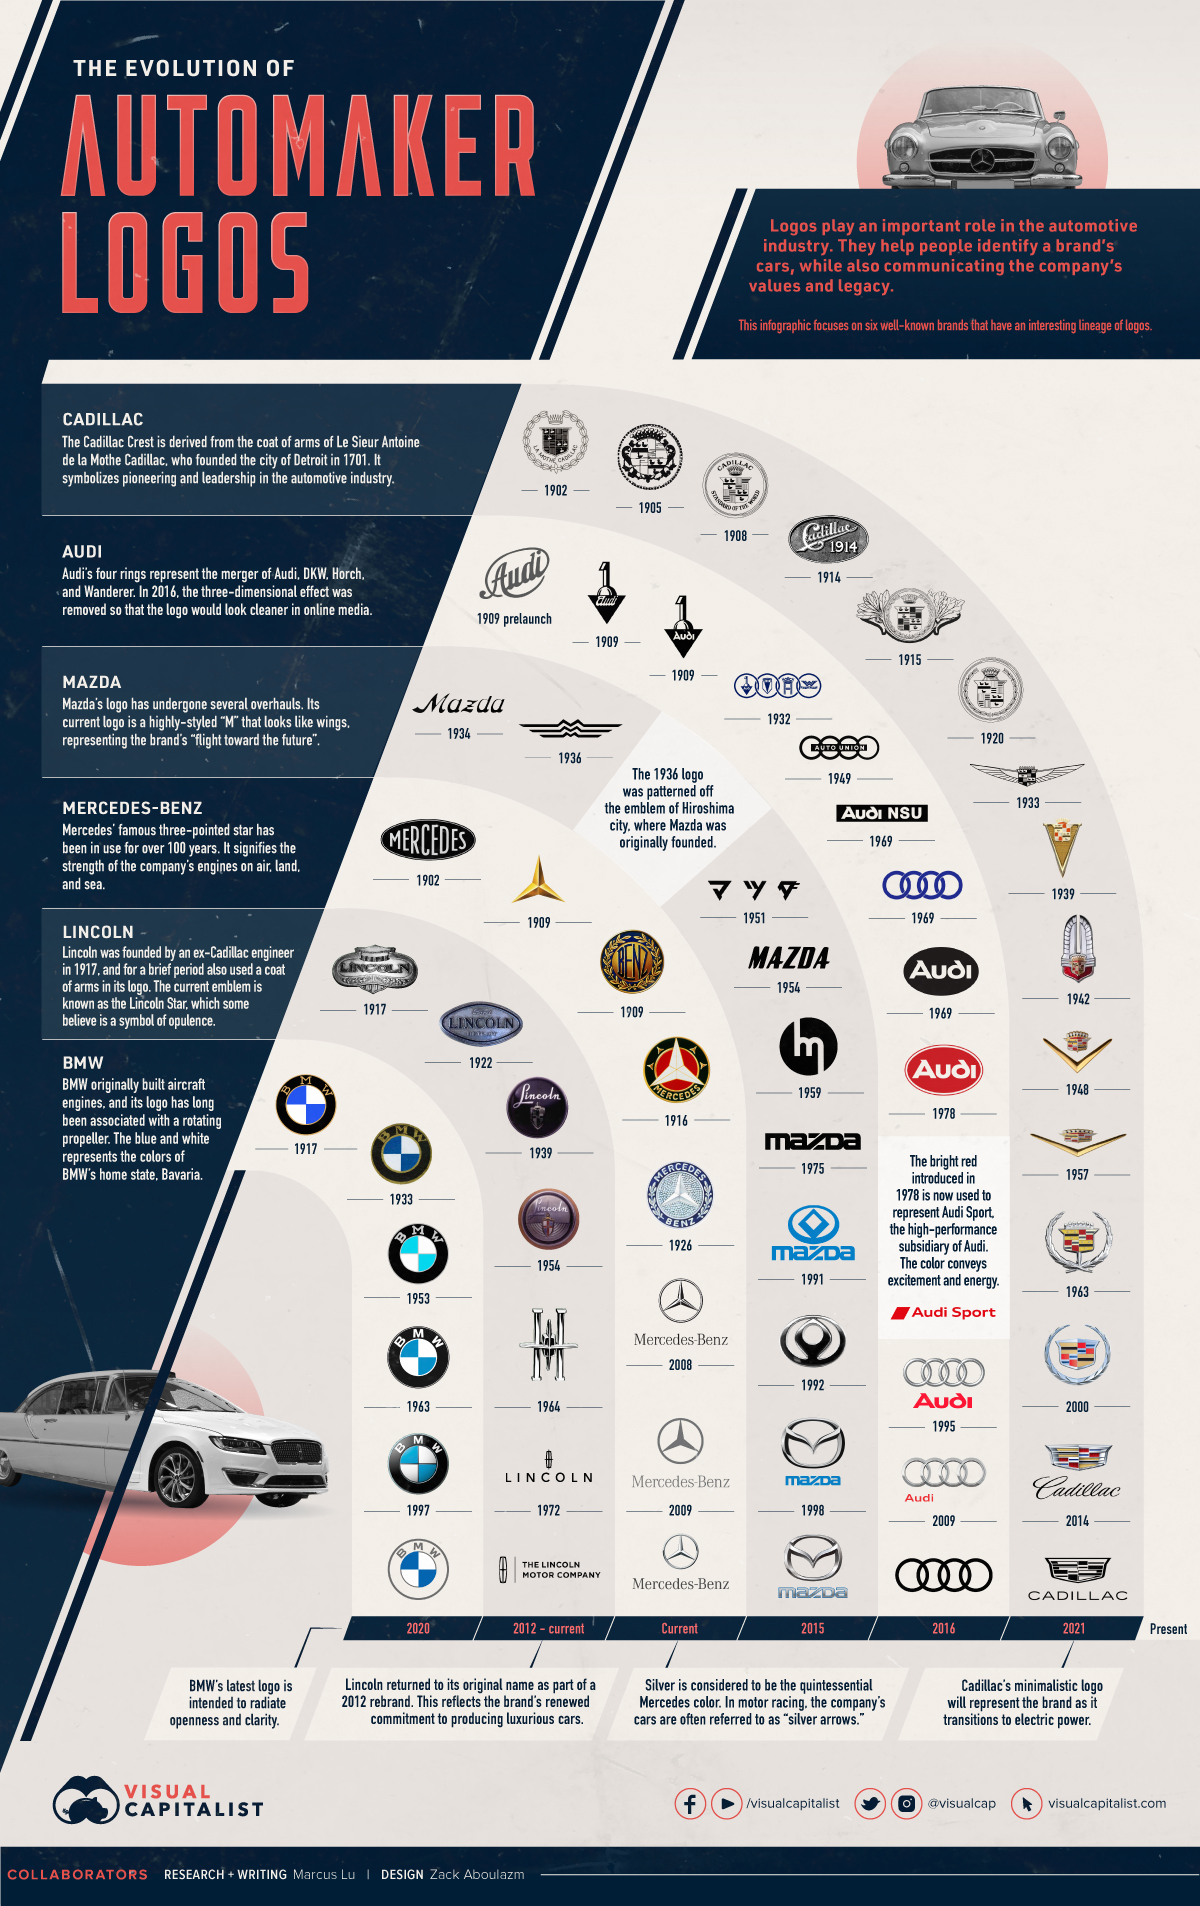 The Evolution of Automaker Logos - Infographic